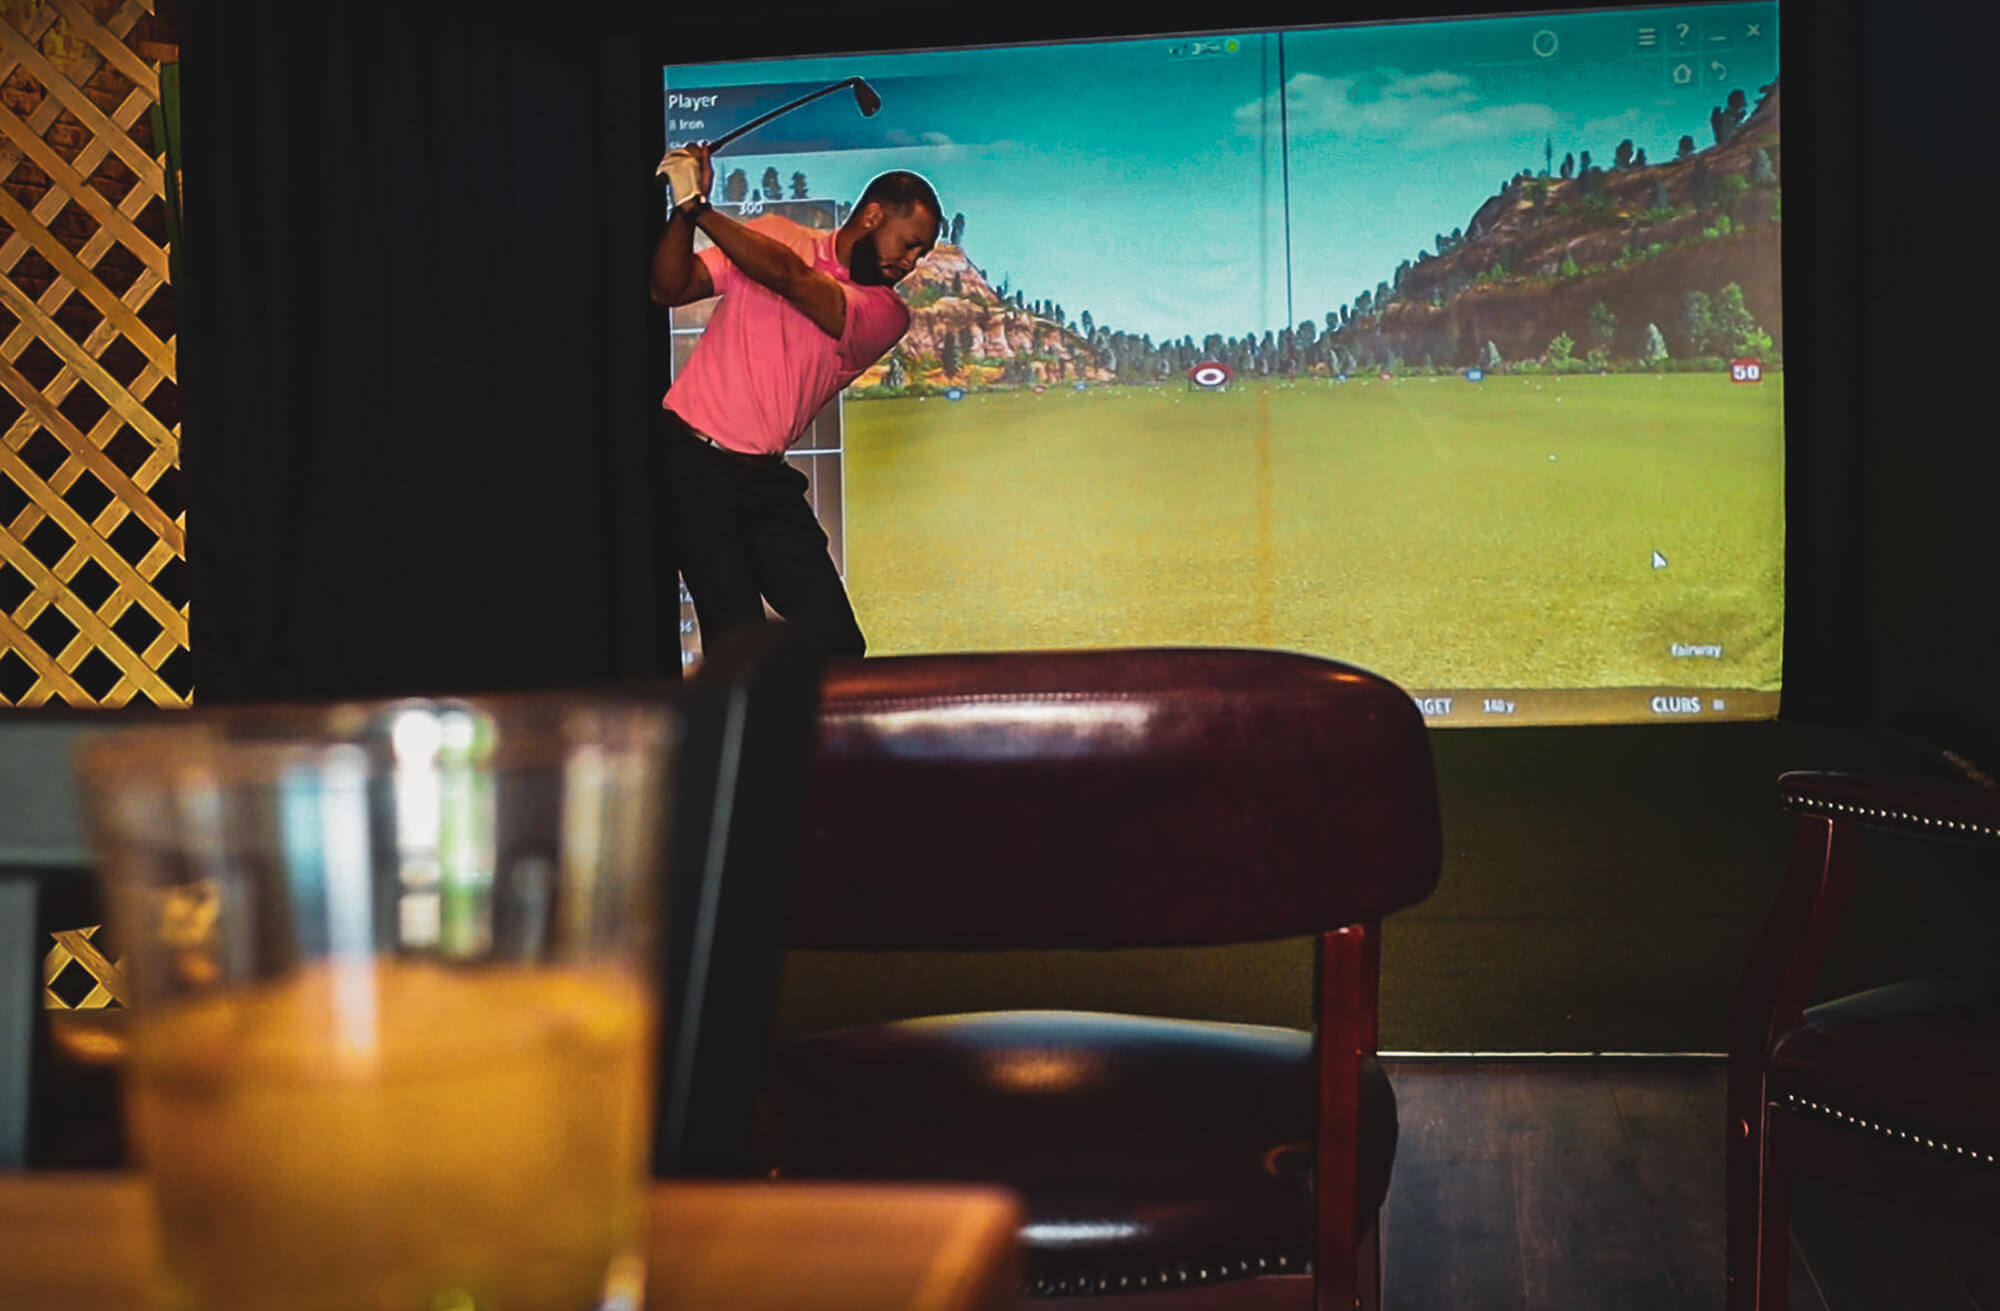 Caddy Shack Golf Pub soft focus on drink with pulled focus on patron using golf simulator Decatur IL